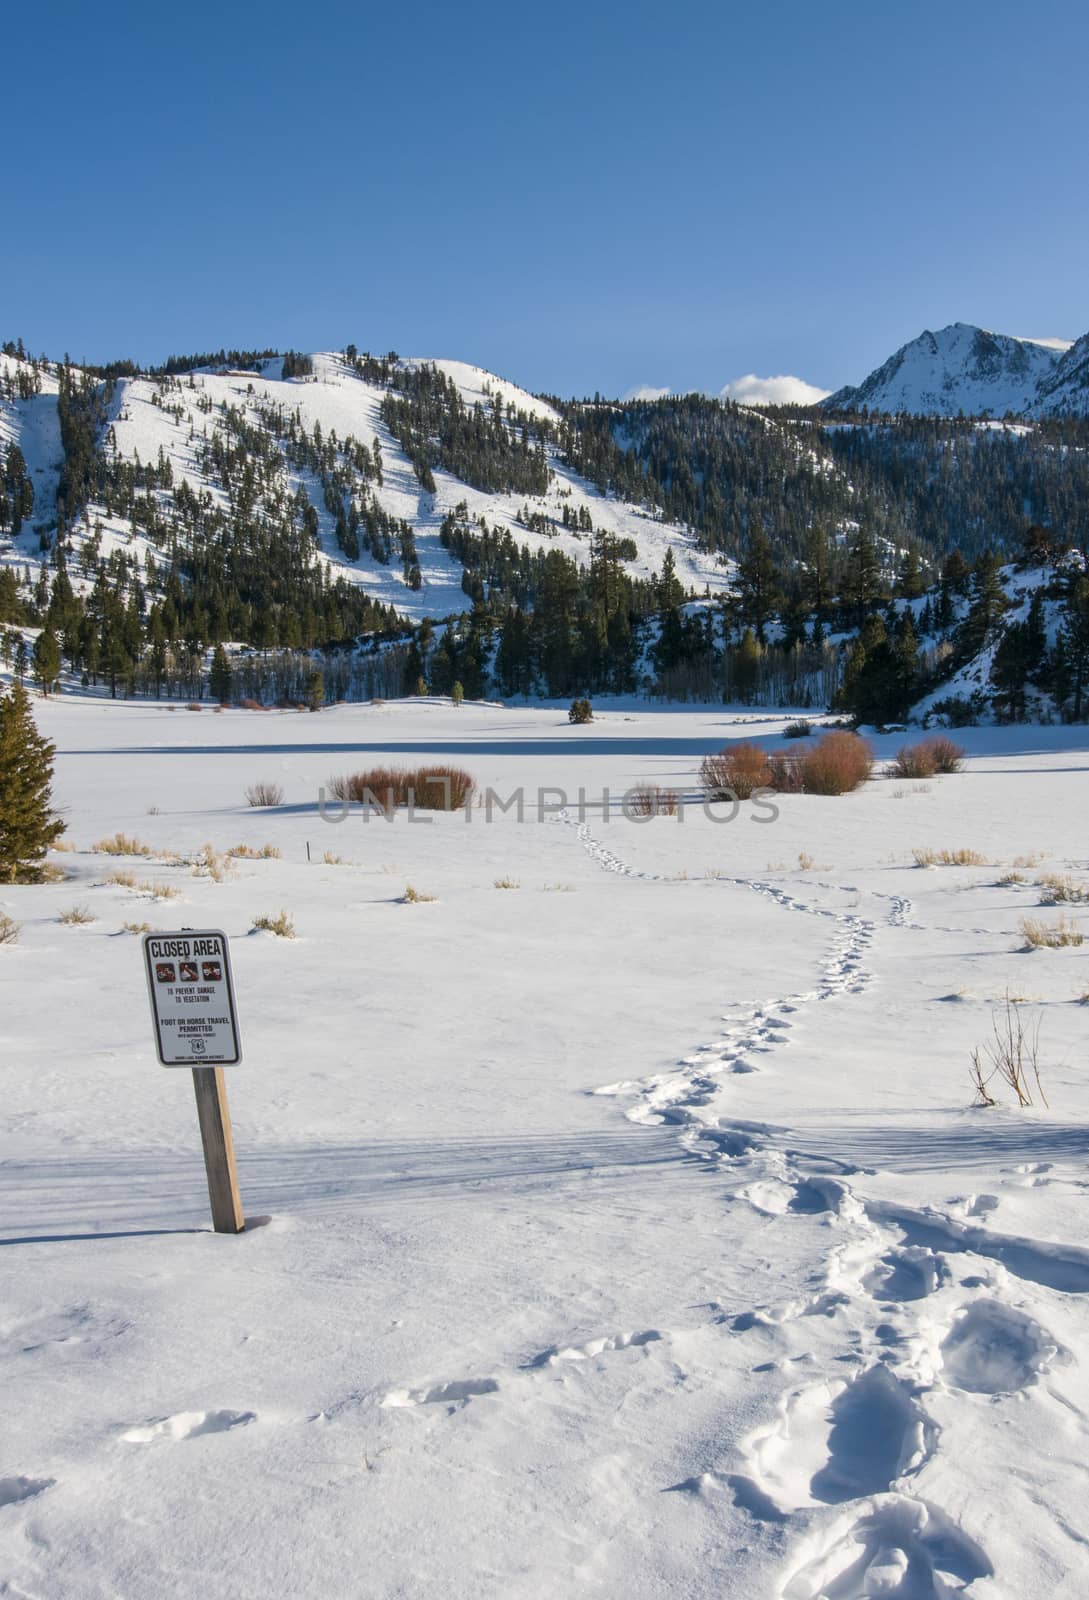 Footprints in snow tress-passing in closed area, June Lake Road, by Njean